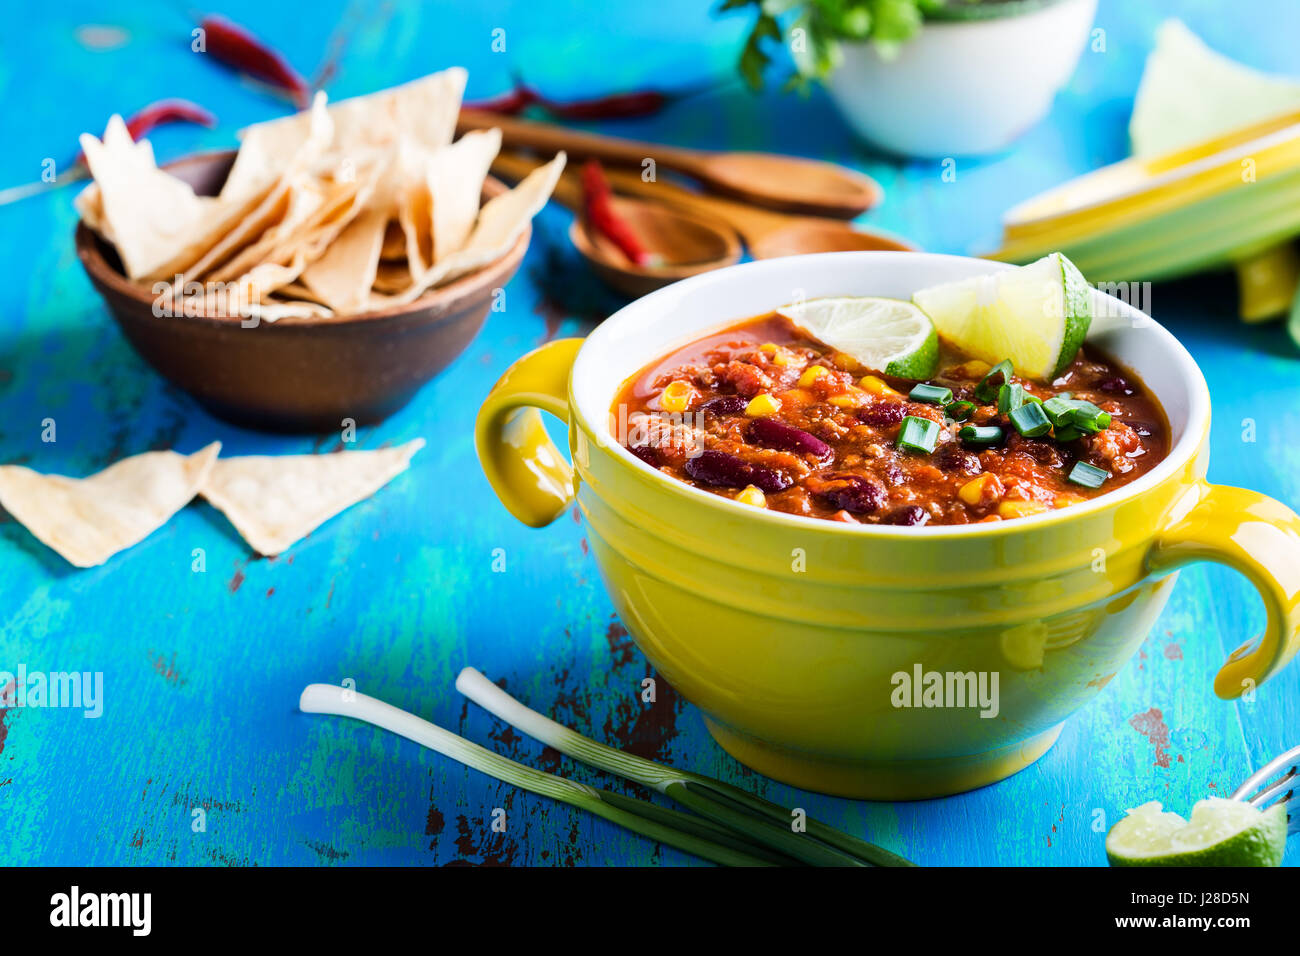 Chili con carne stew served in yellow bowl on rustic blue wooden table, Mexican cuisine Stock Photo